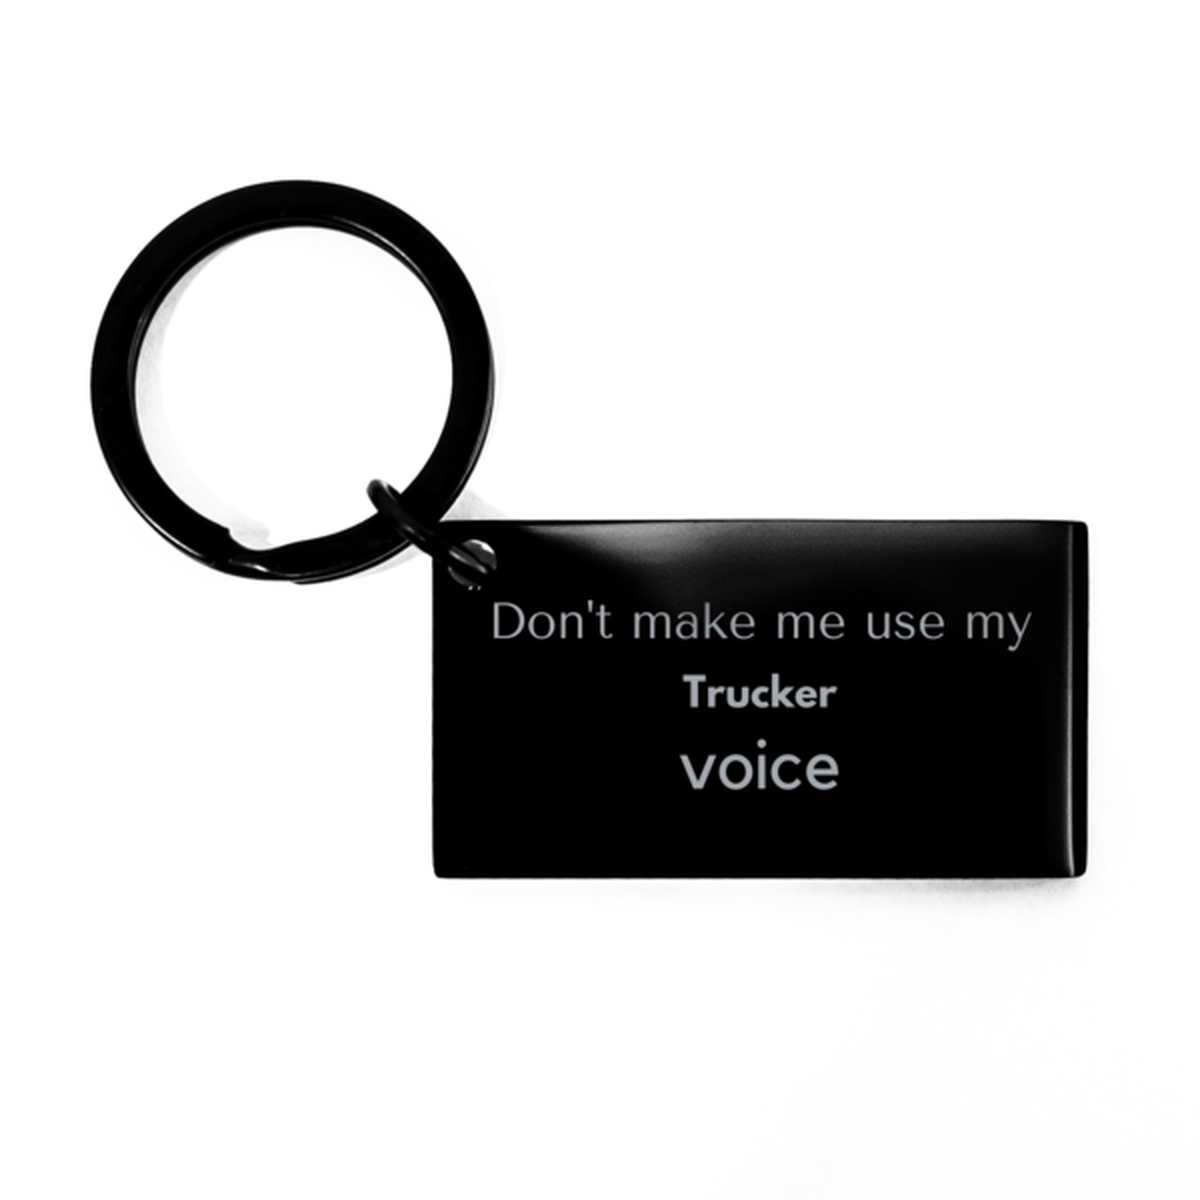 Don't make me use my Trucker voice, Sarcasm Trucker Gifts, Christmas Trucker Keychain Birthday Unique Gifts For Trucker Coworkers, Men, Women, Colleague, Friends